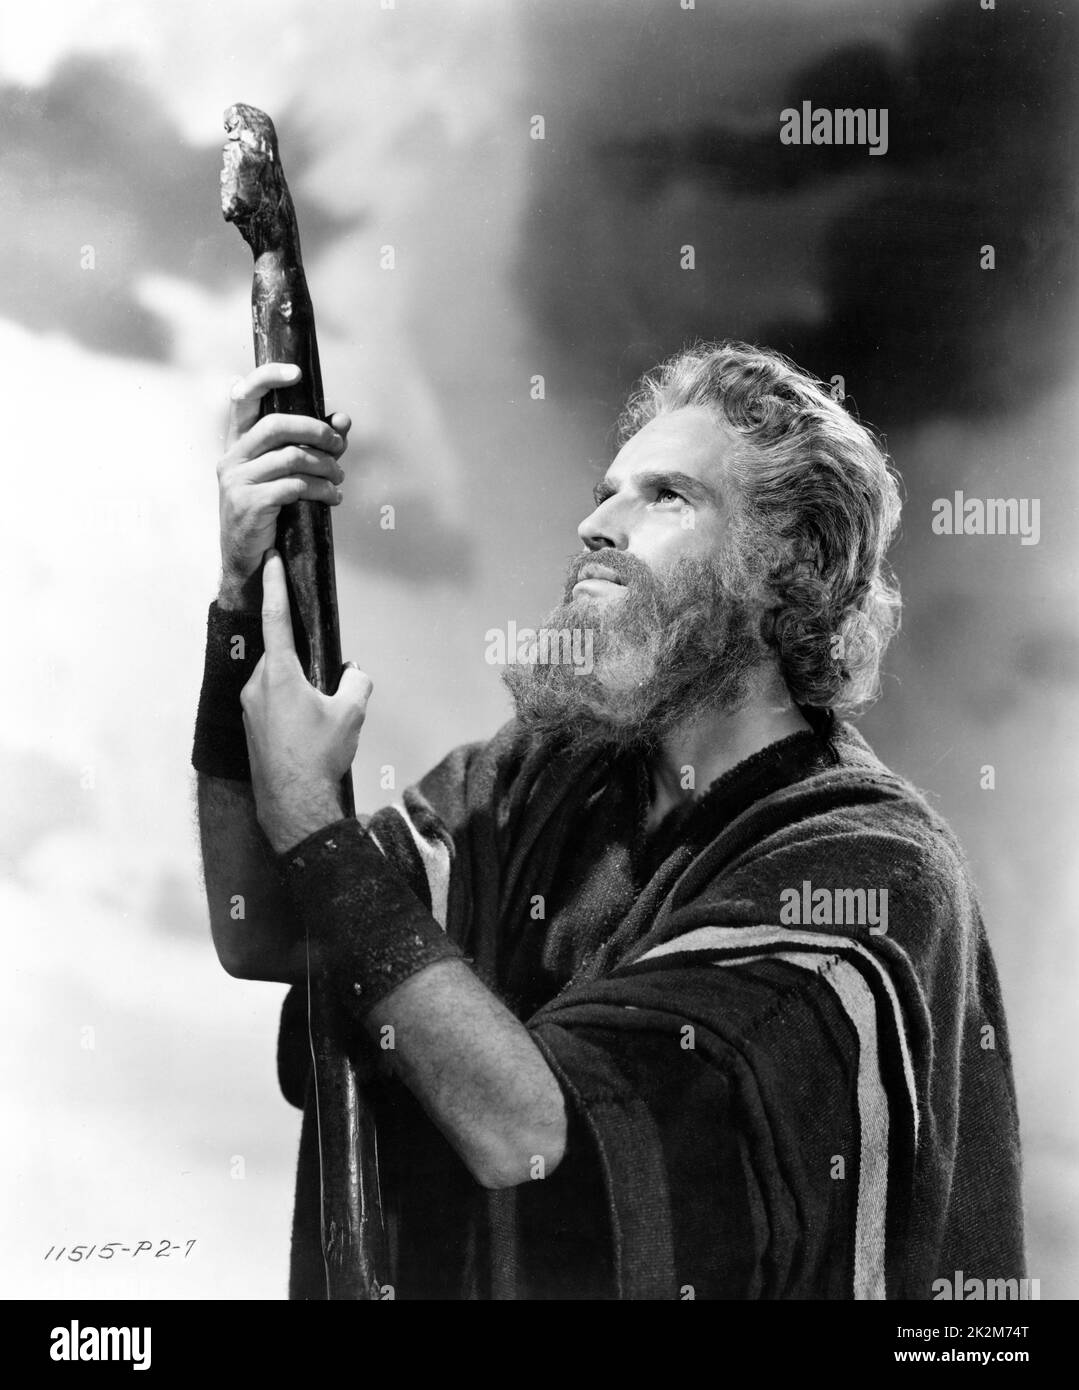 CHARLTON HESTON Portrait as Moses in THE TEN COMMANDMENTS 1956 director CECIL B. DeMILLE Motion Pictures Associates / Paramount Pictures Stock Photo